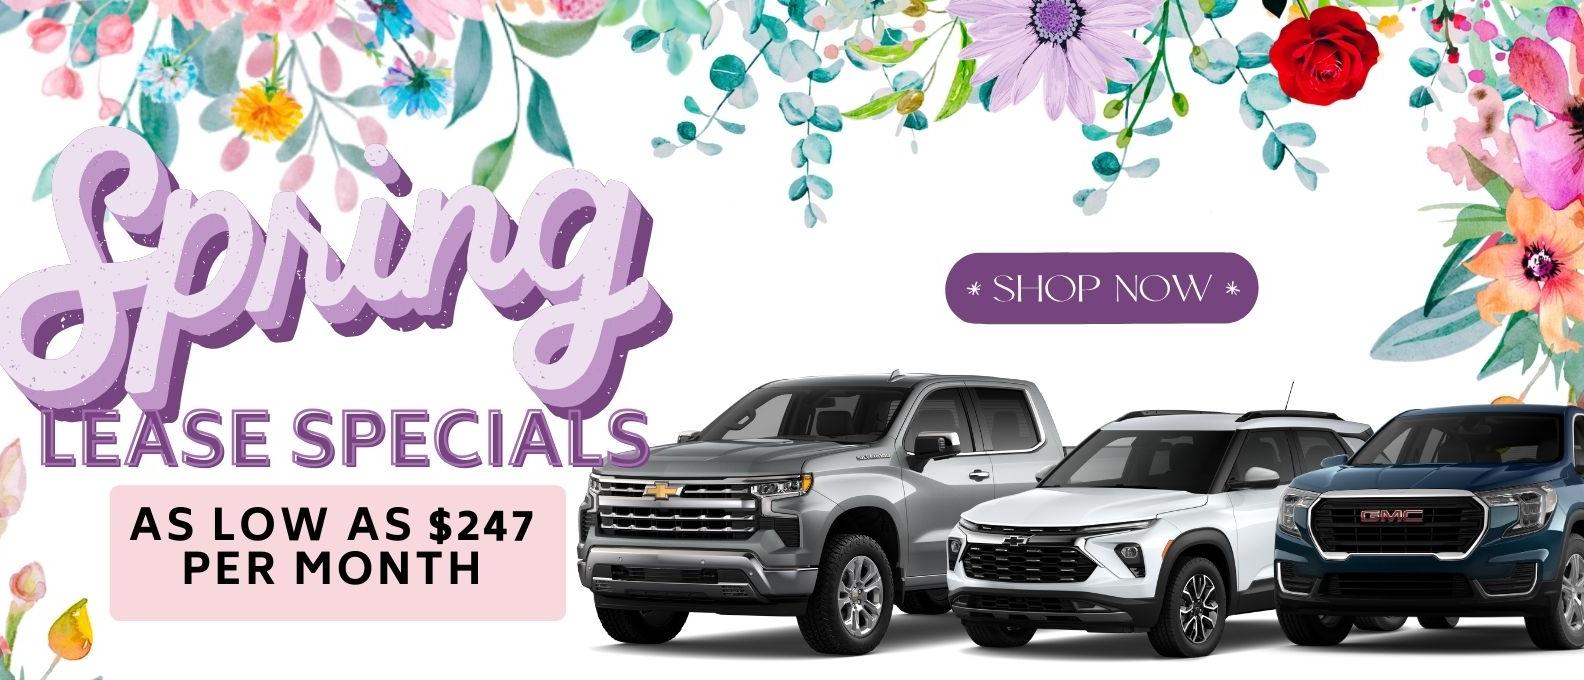 April Lease Specials at Jerry's as low as $247 per month